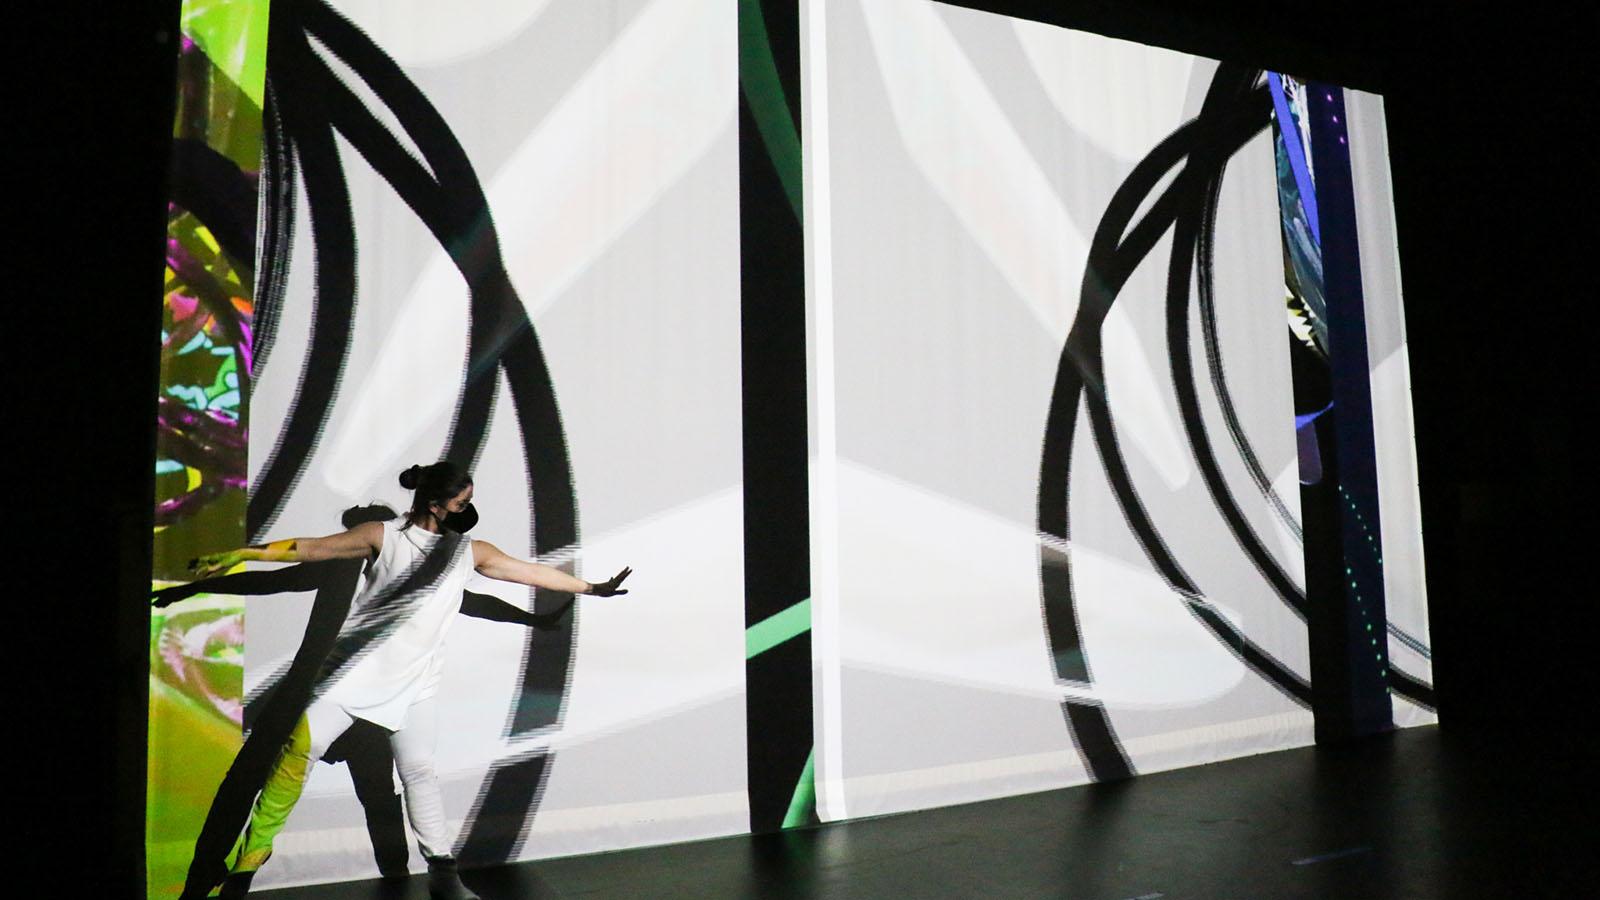 A swirling projection is layered onto of a dancer with spread legs and outstretched arms